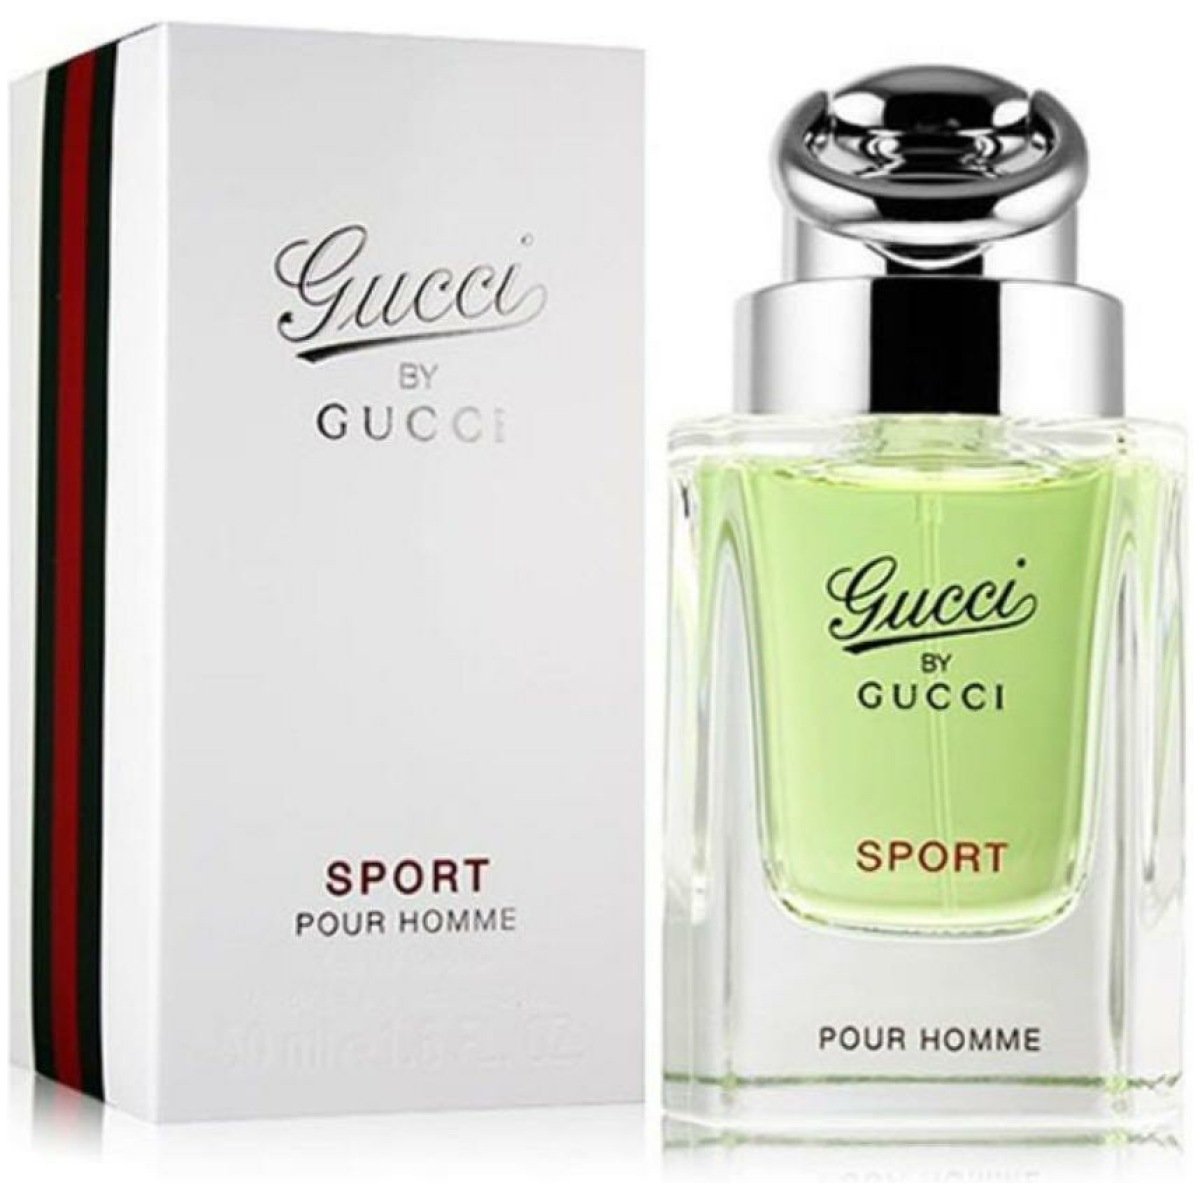 Gucci By Gucci Sport Pour Homme EDT Perfume For Men 90 ml